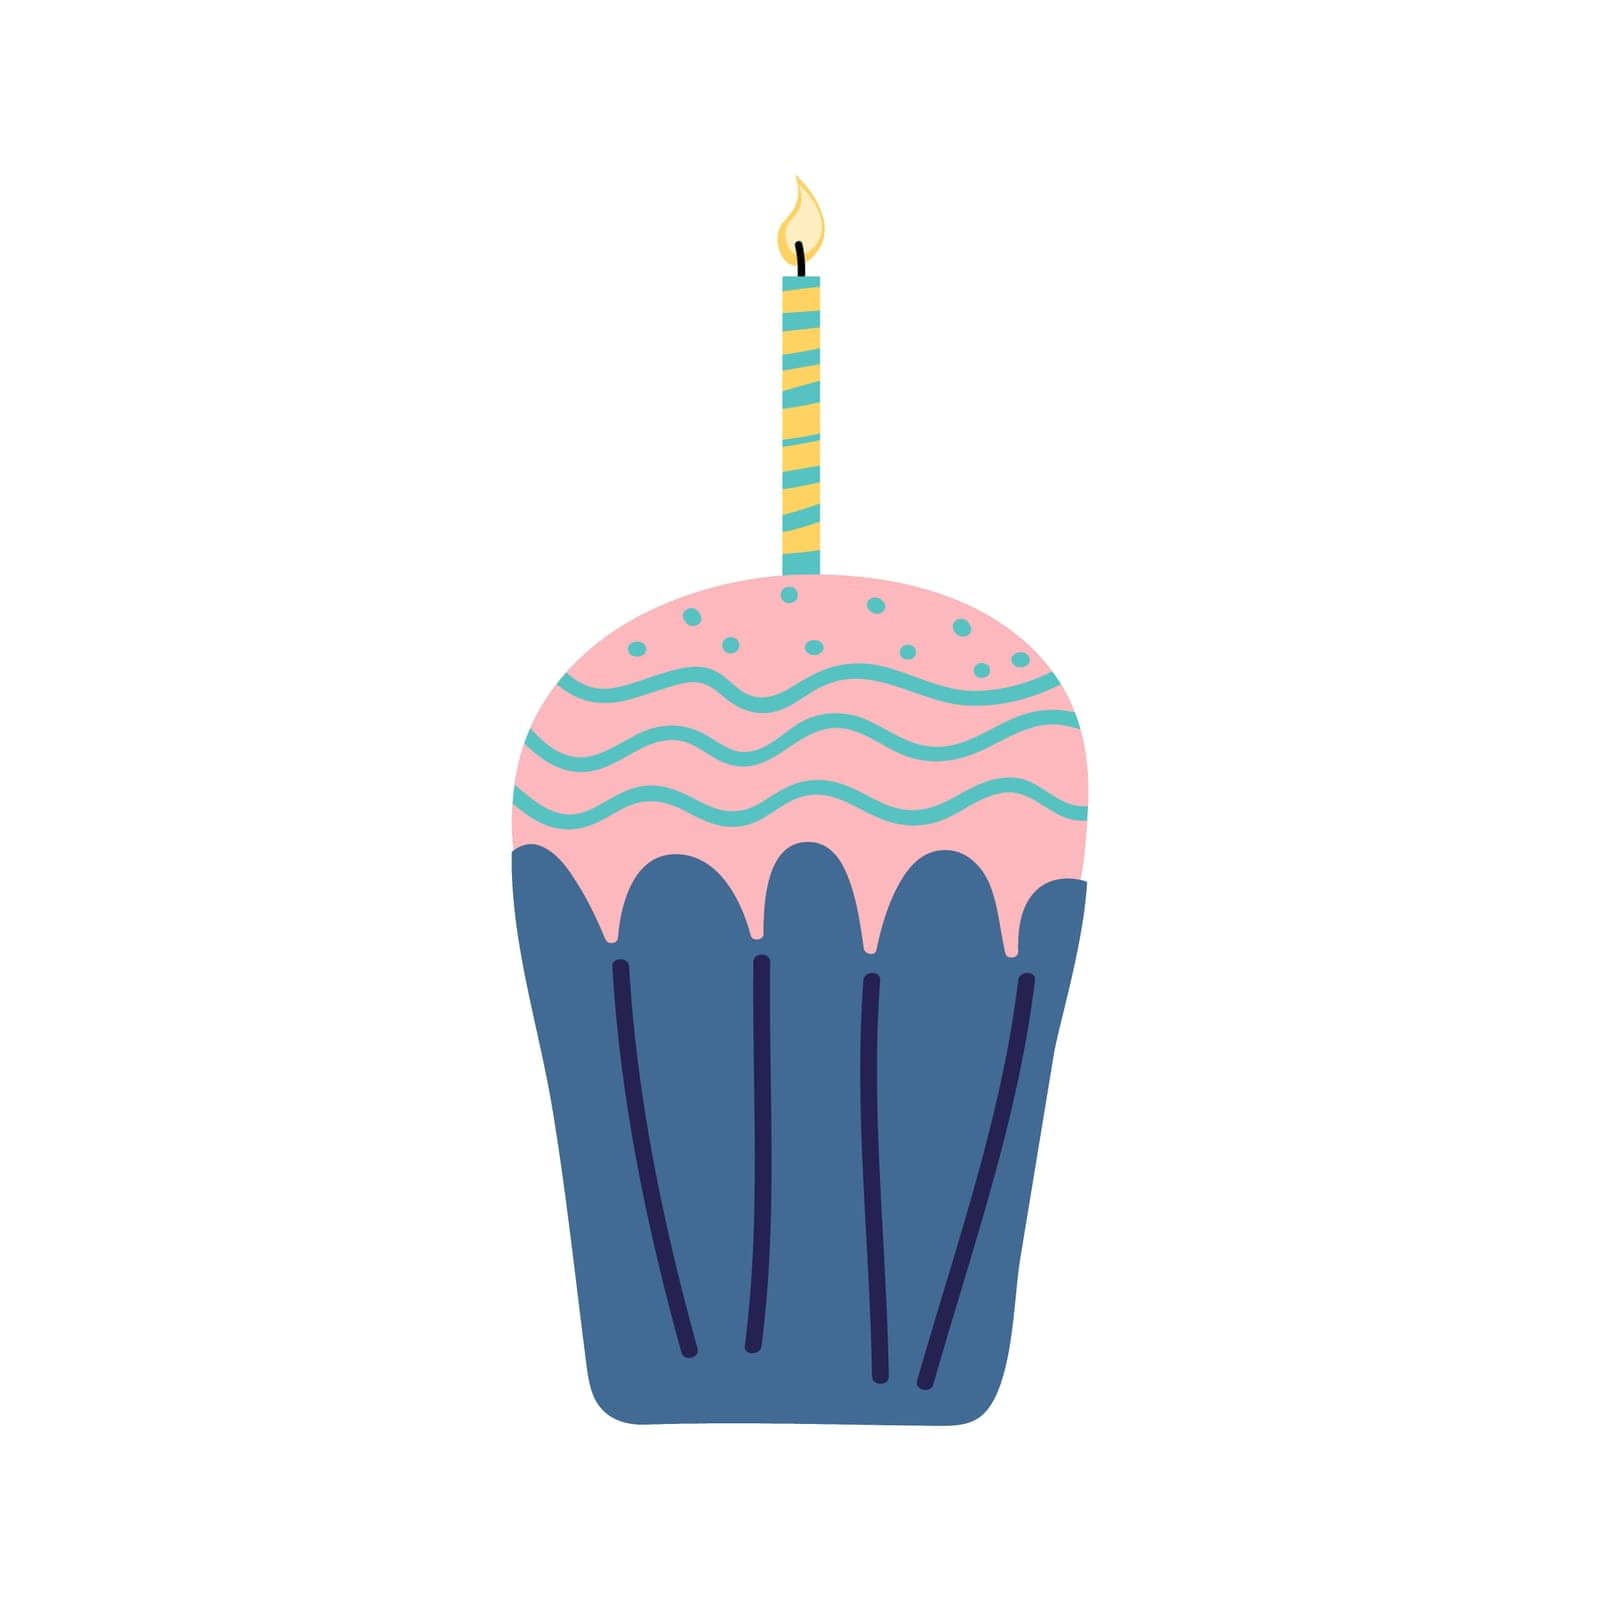 Cupcake with a candle on a birthday, flat. Vector illustration.